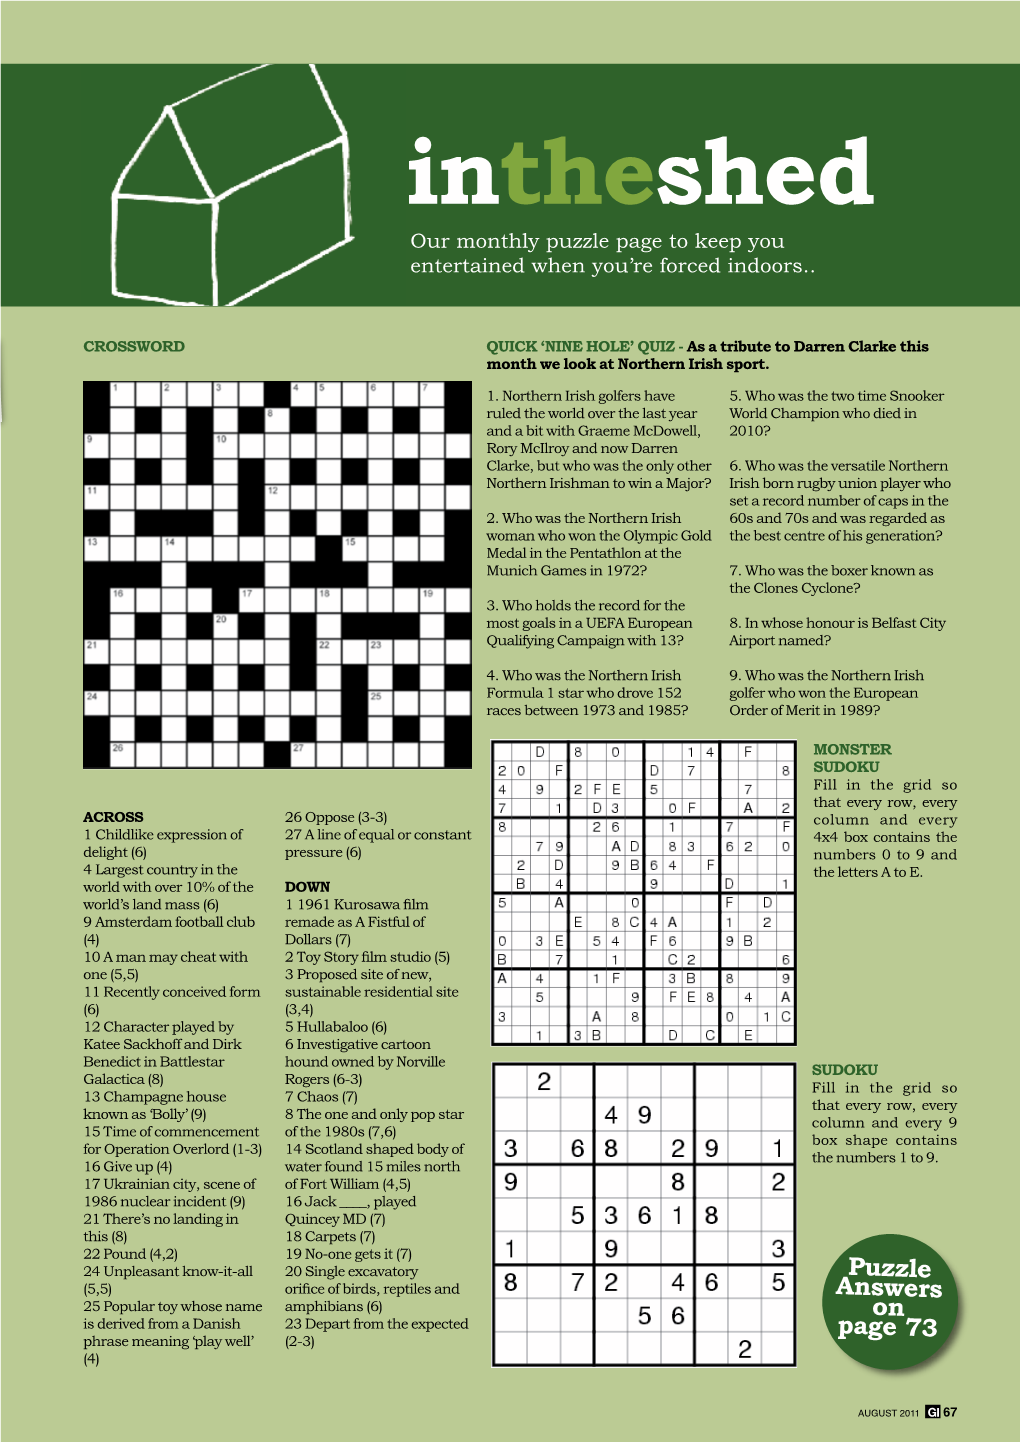 Intheshed Our Monthly Puzzle Page to Keep You Entertained When You’Re Forced Indoors